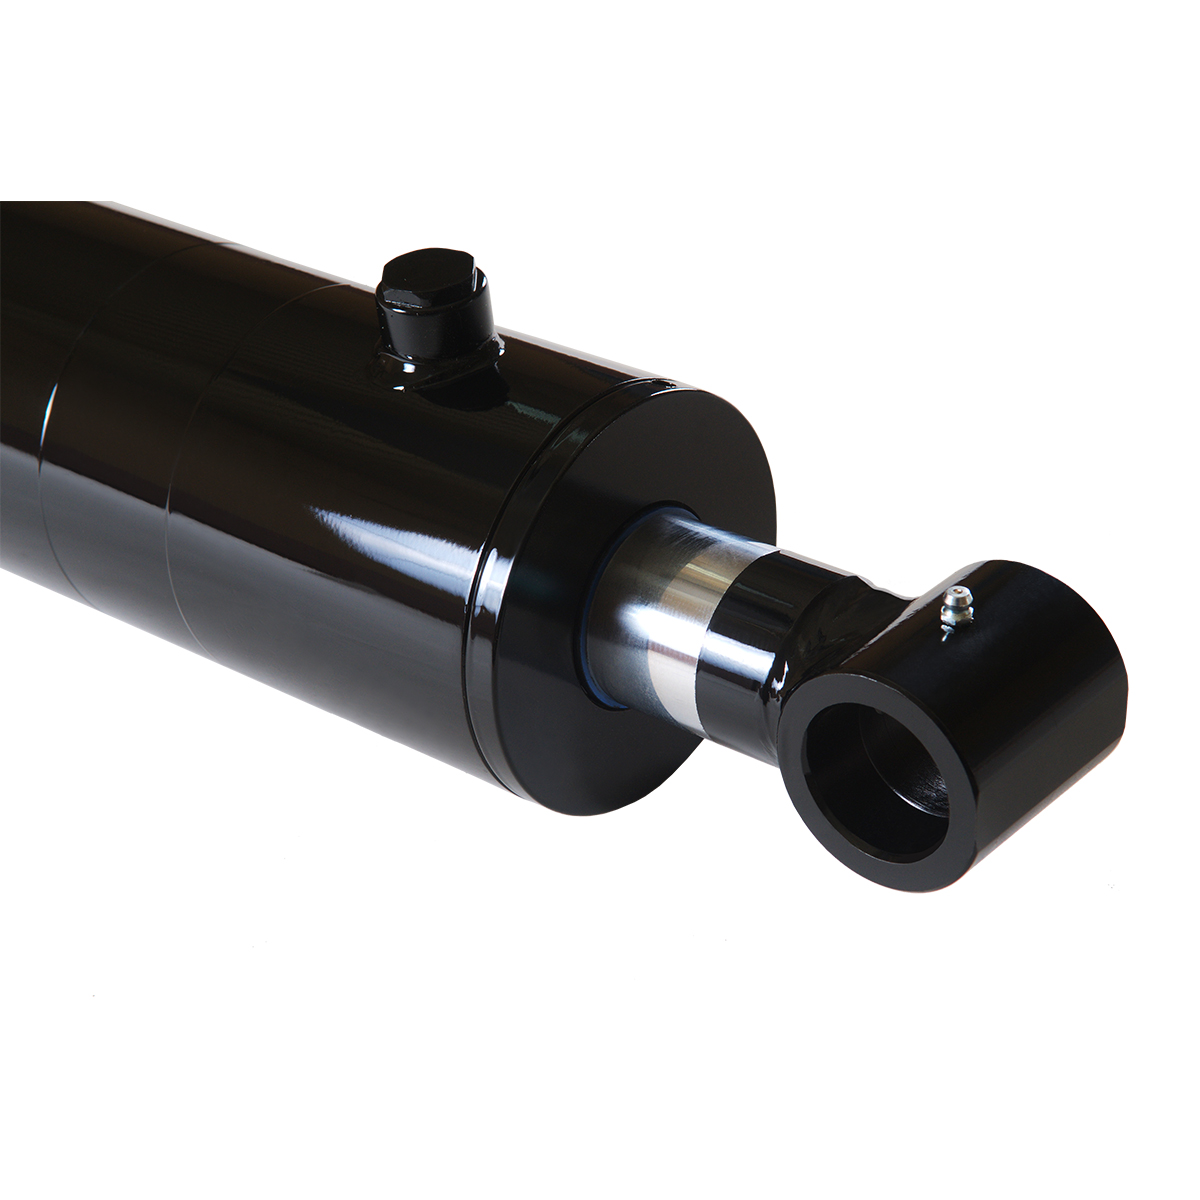 4 bore x 10 stroke hydraulic cylinder, welded cross tube double acting cylinder | Magister Hydraulics